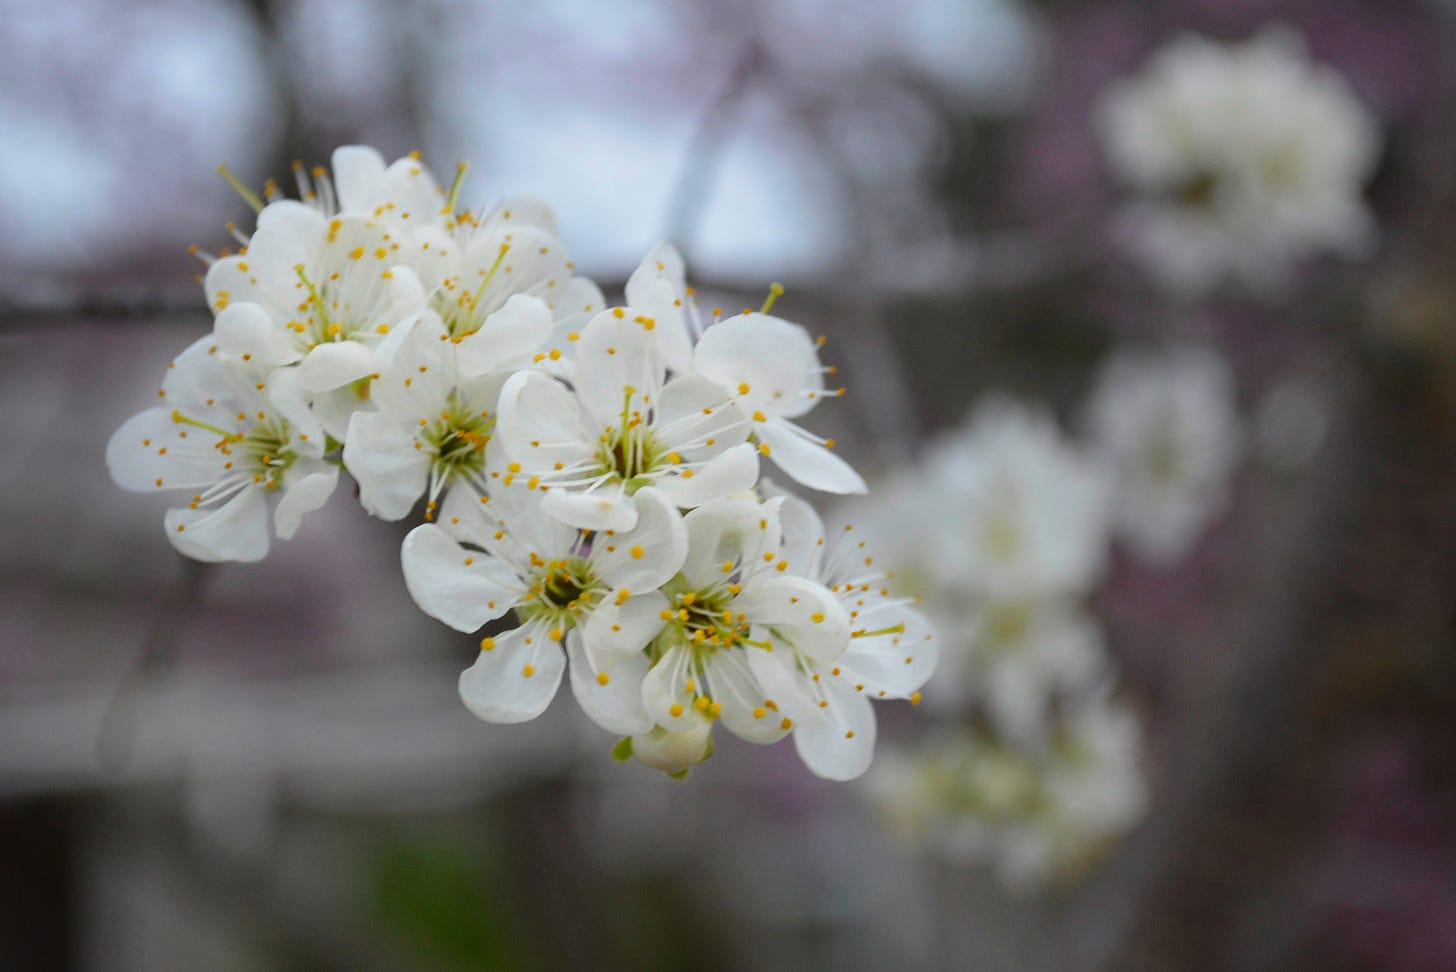 A cluster of white pear tree blossoms with more blurred in the background